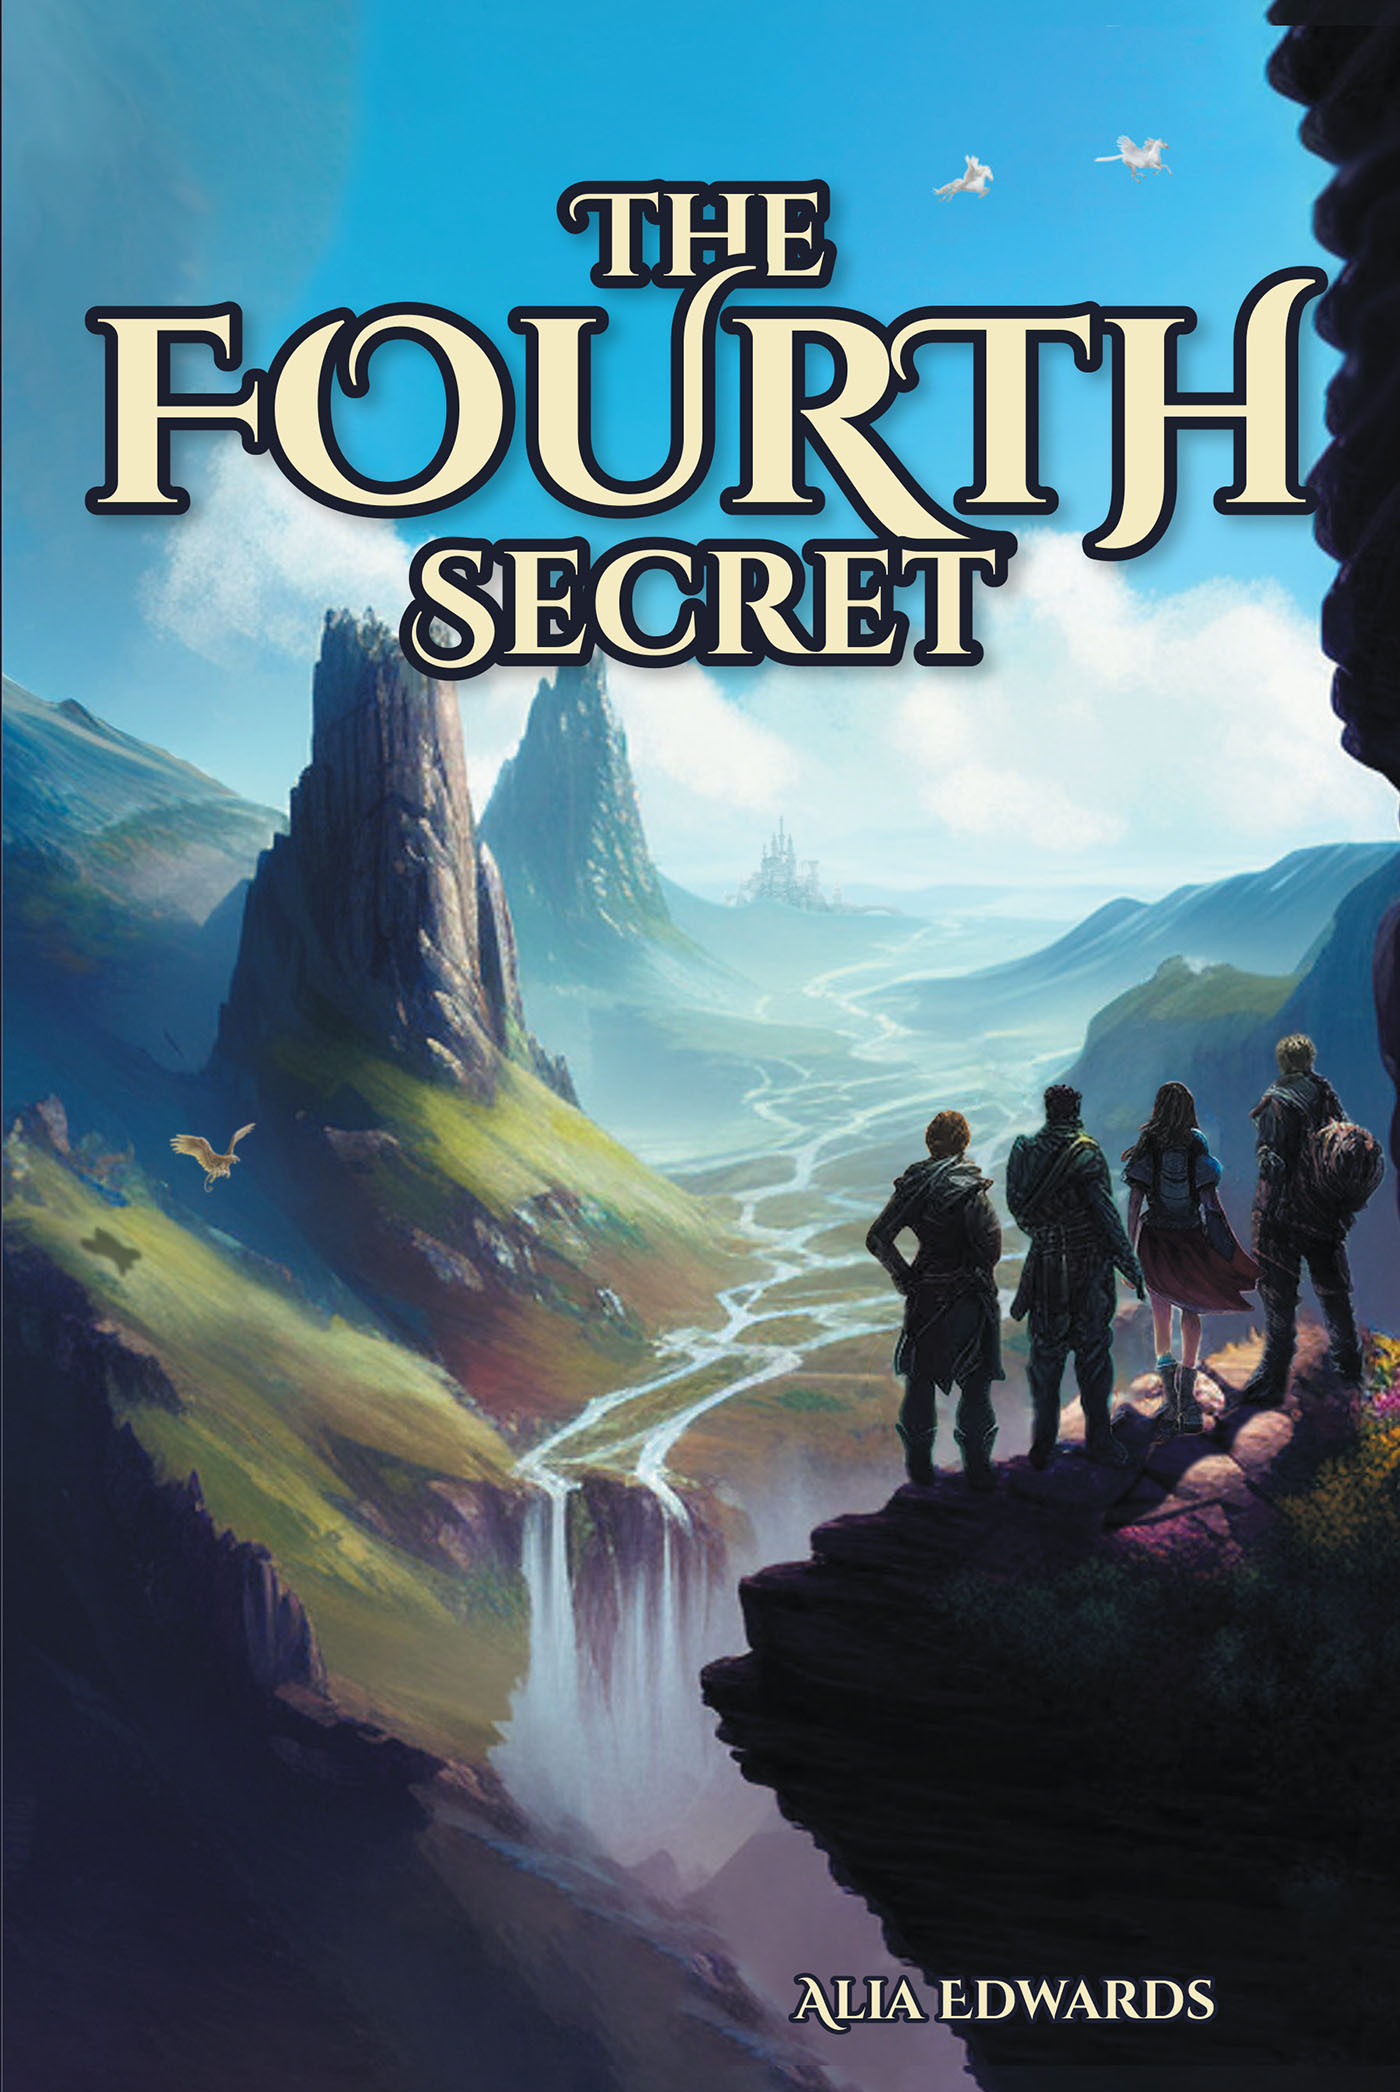 Author Alia Edwards’s New Book, "The Fourth Secret," Follows a Small Group of Travelers Searching for a Promised Warrior Who Can Stop the Dark Forces Plaguing Their Lands